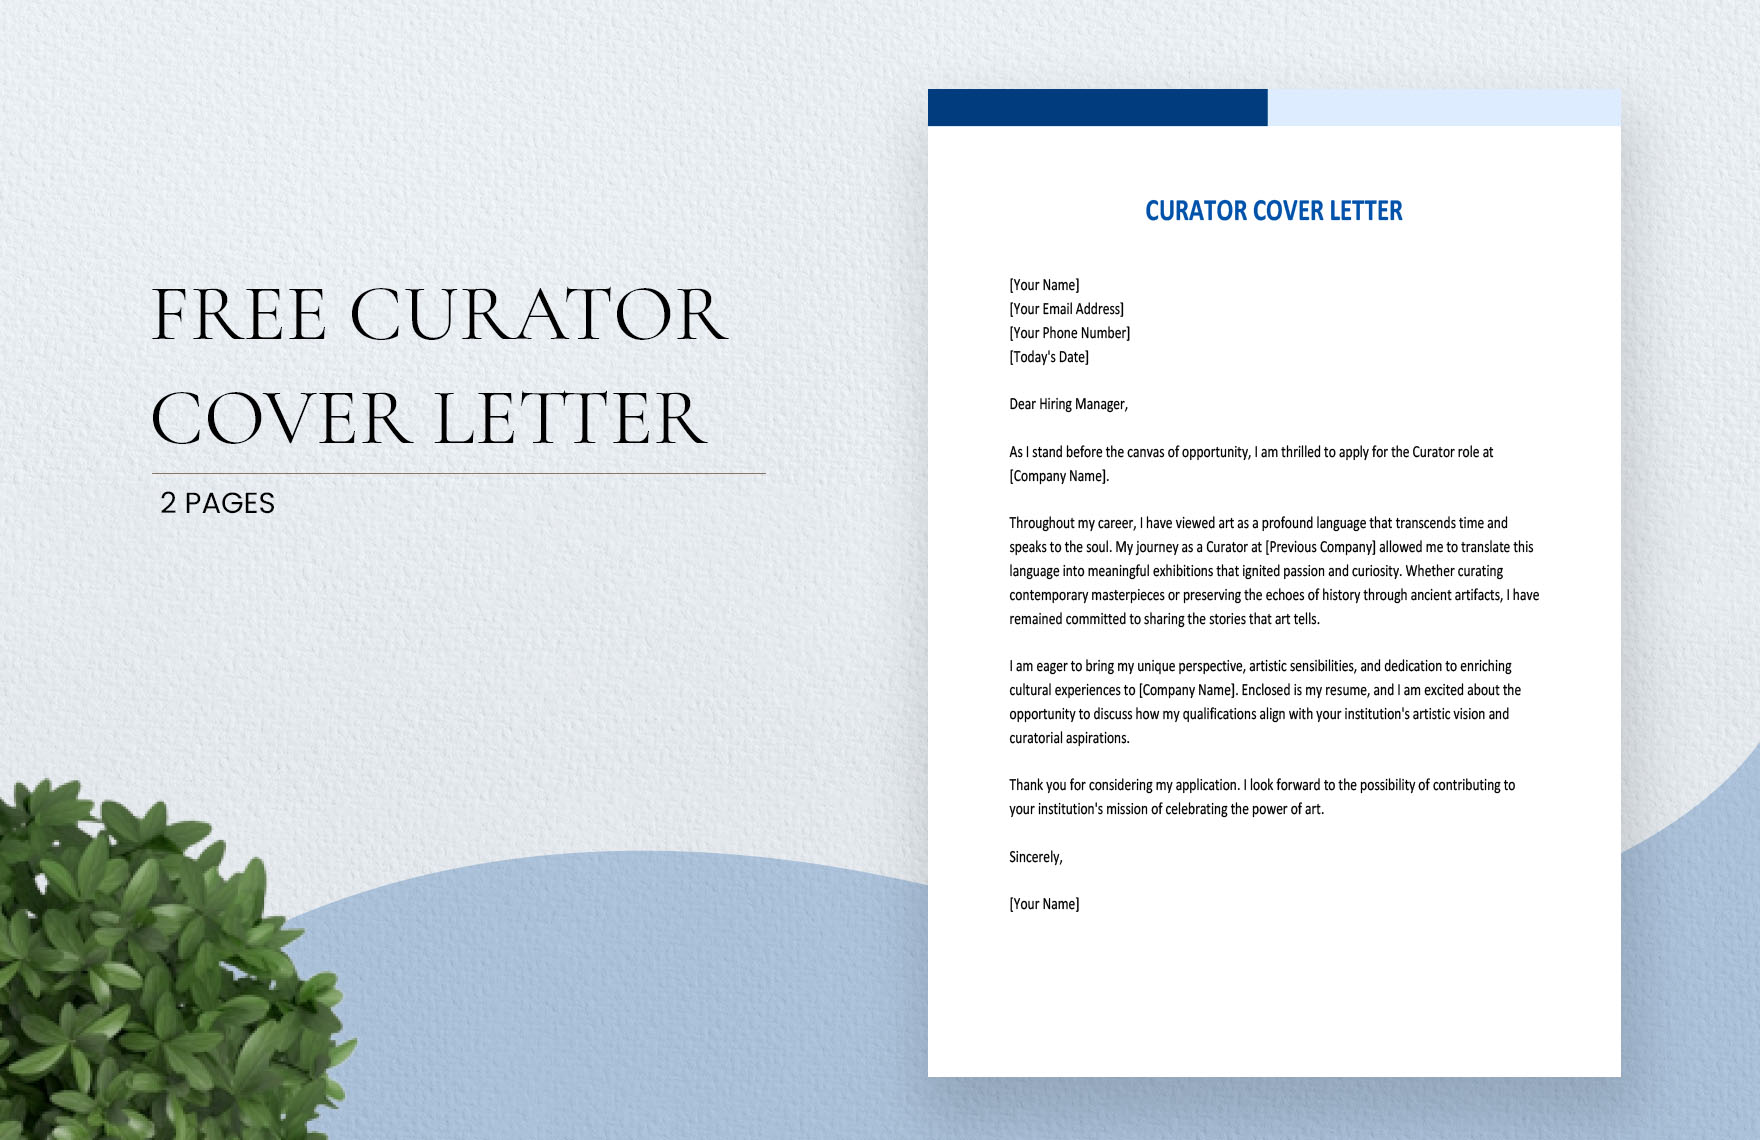 Curator Cover Letter